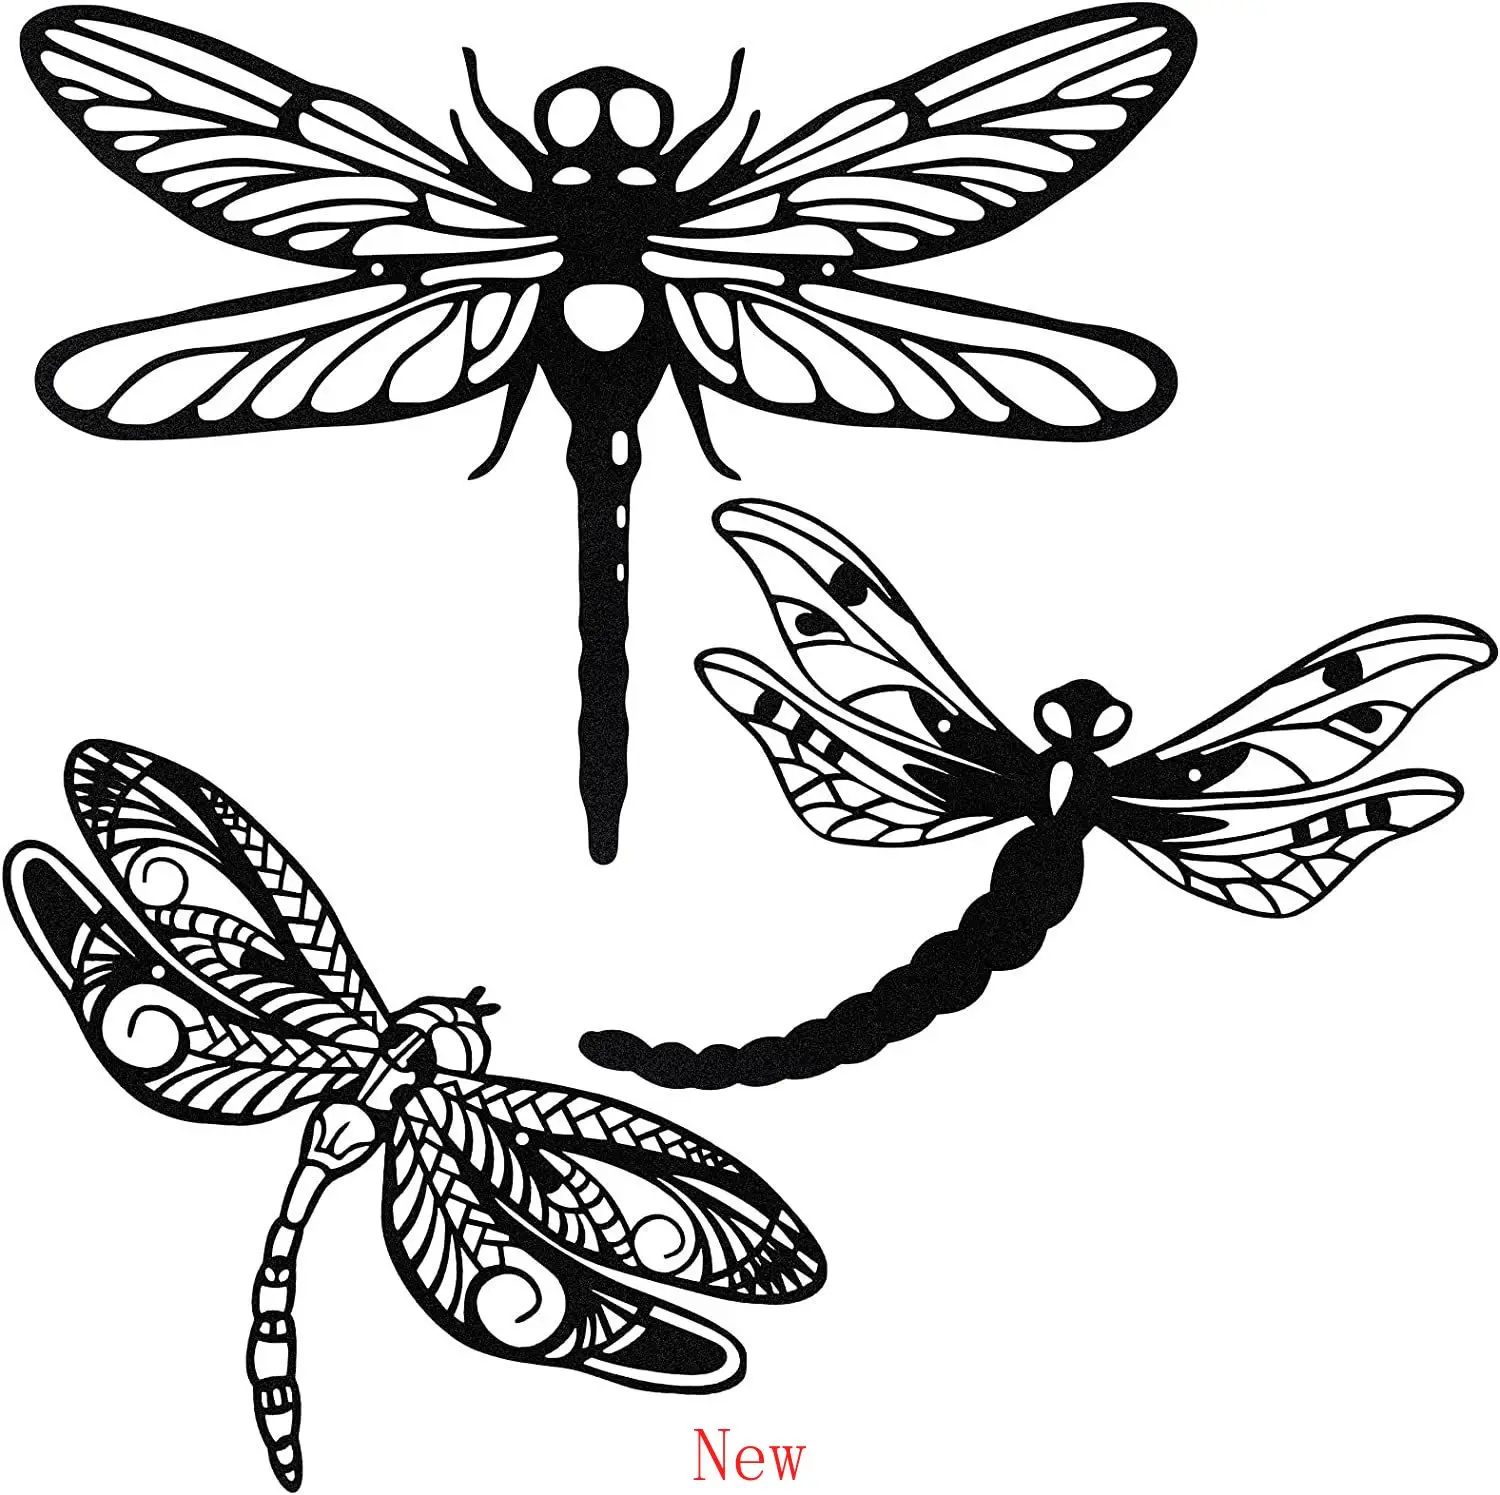 

1pc Dragonfly Wall Hanging Decoration Metal Art Home Decor Living Room Bedroom Children's Room Self-Adhesive Stickers wall deco